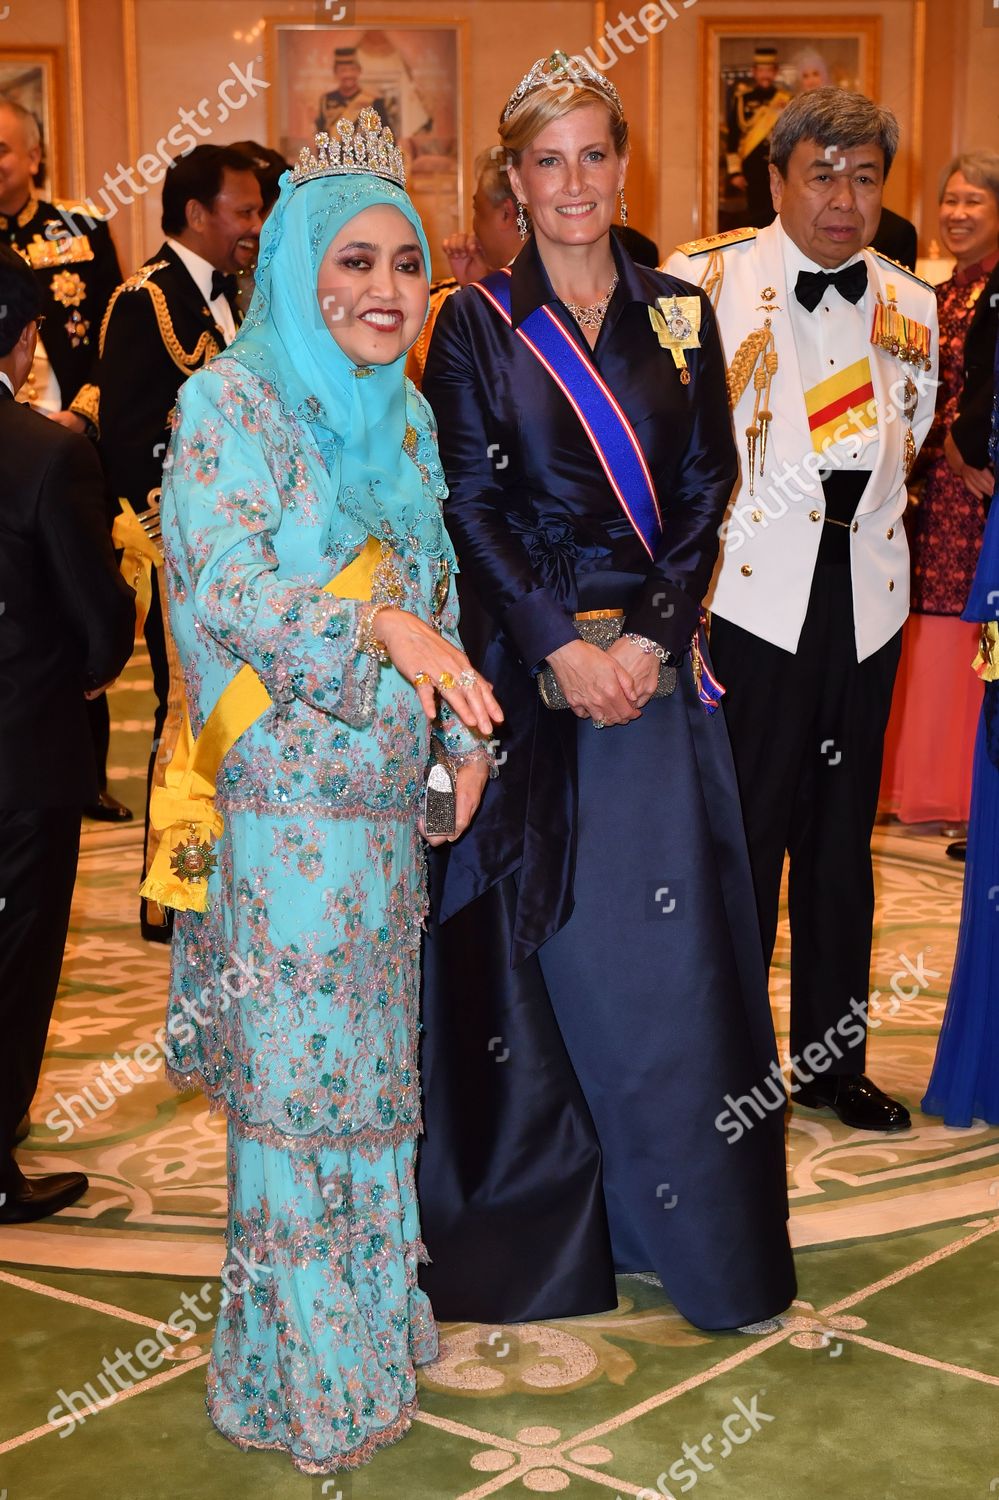 prince-edward-and-sophie-countess-of-wessex-state-visit-to-brunei-shutterstock-editorial-9120195cw.jpg